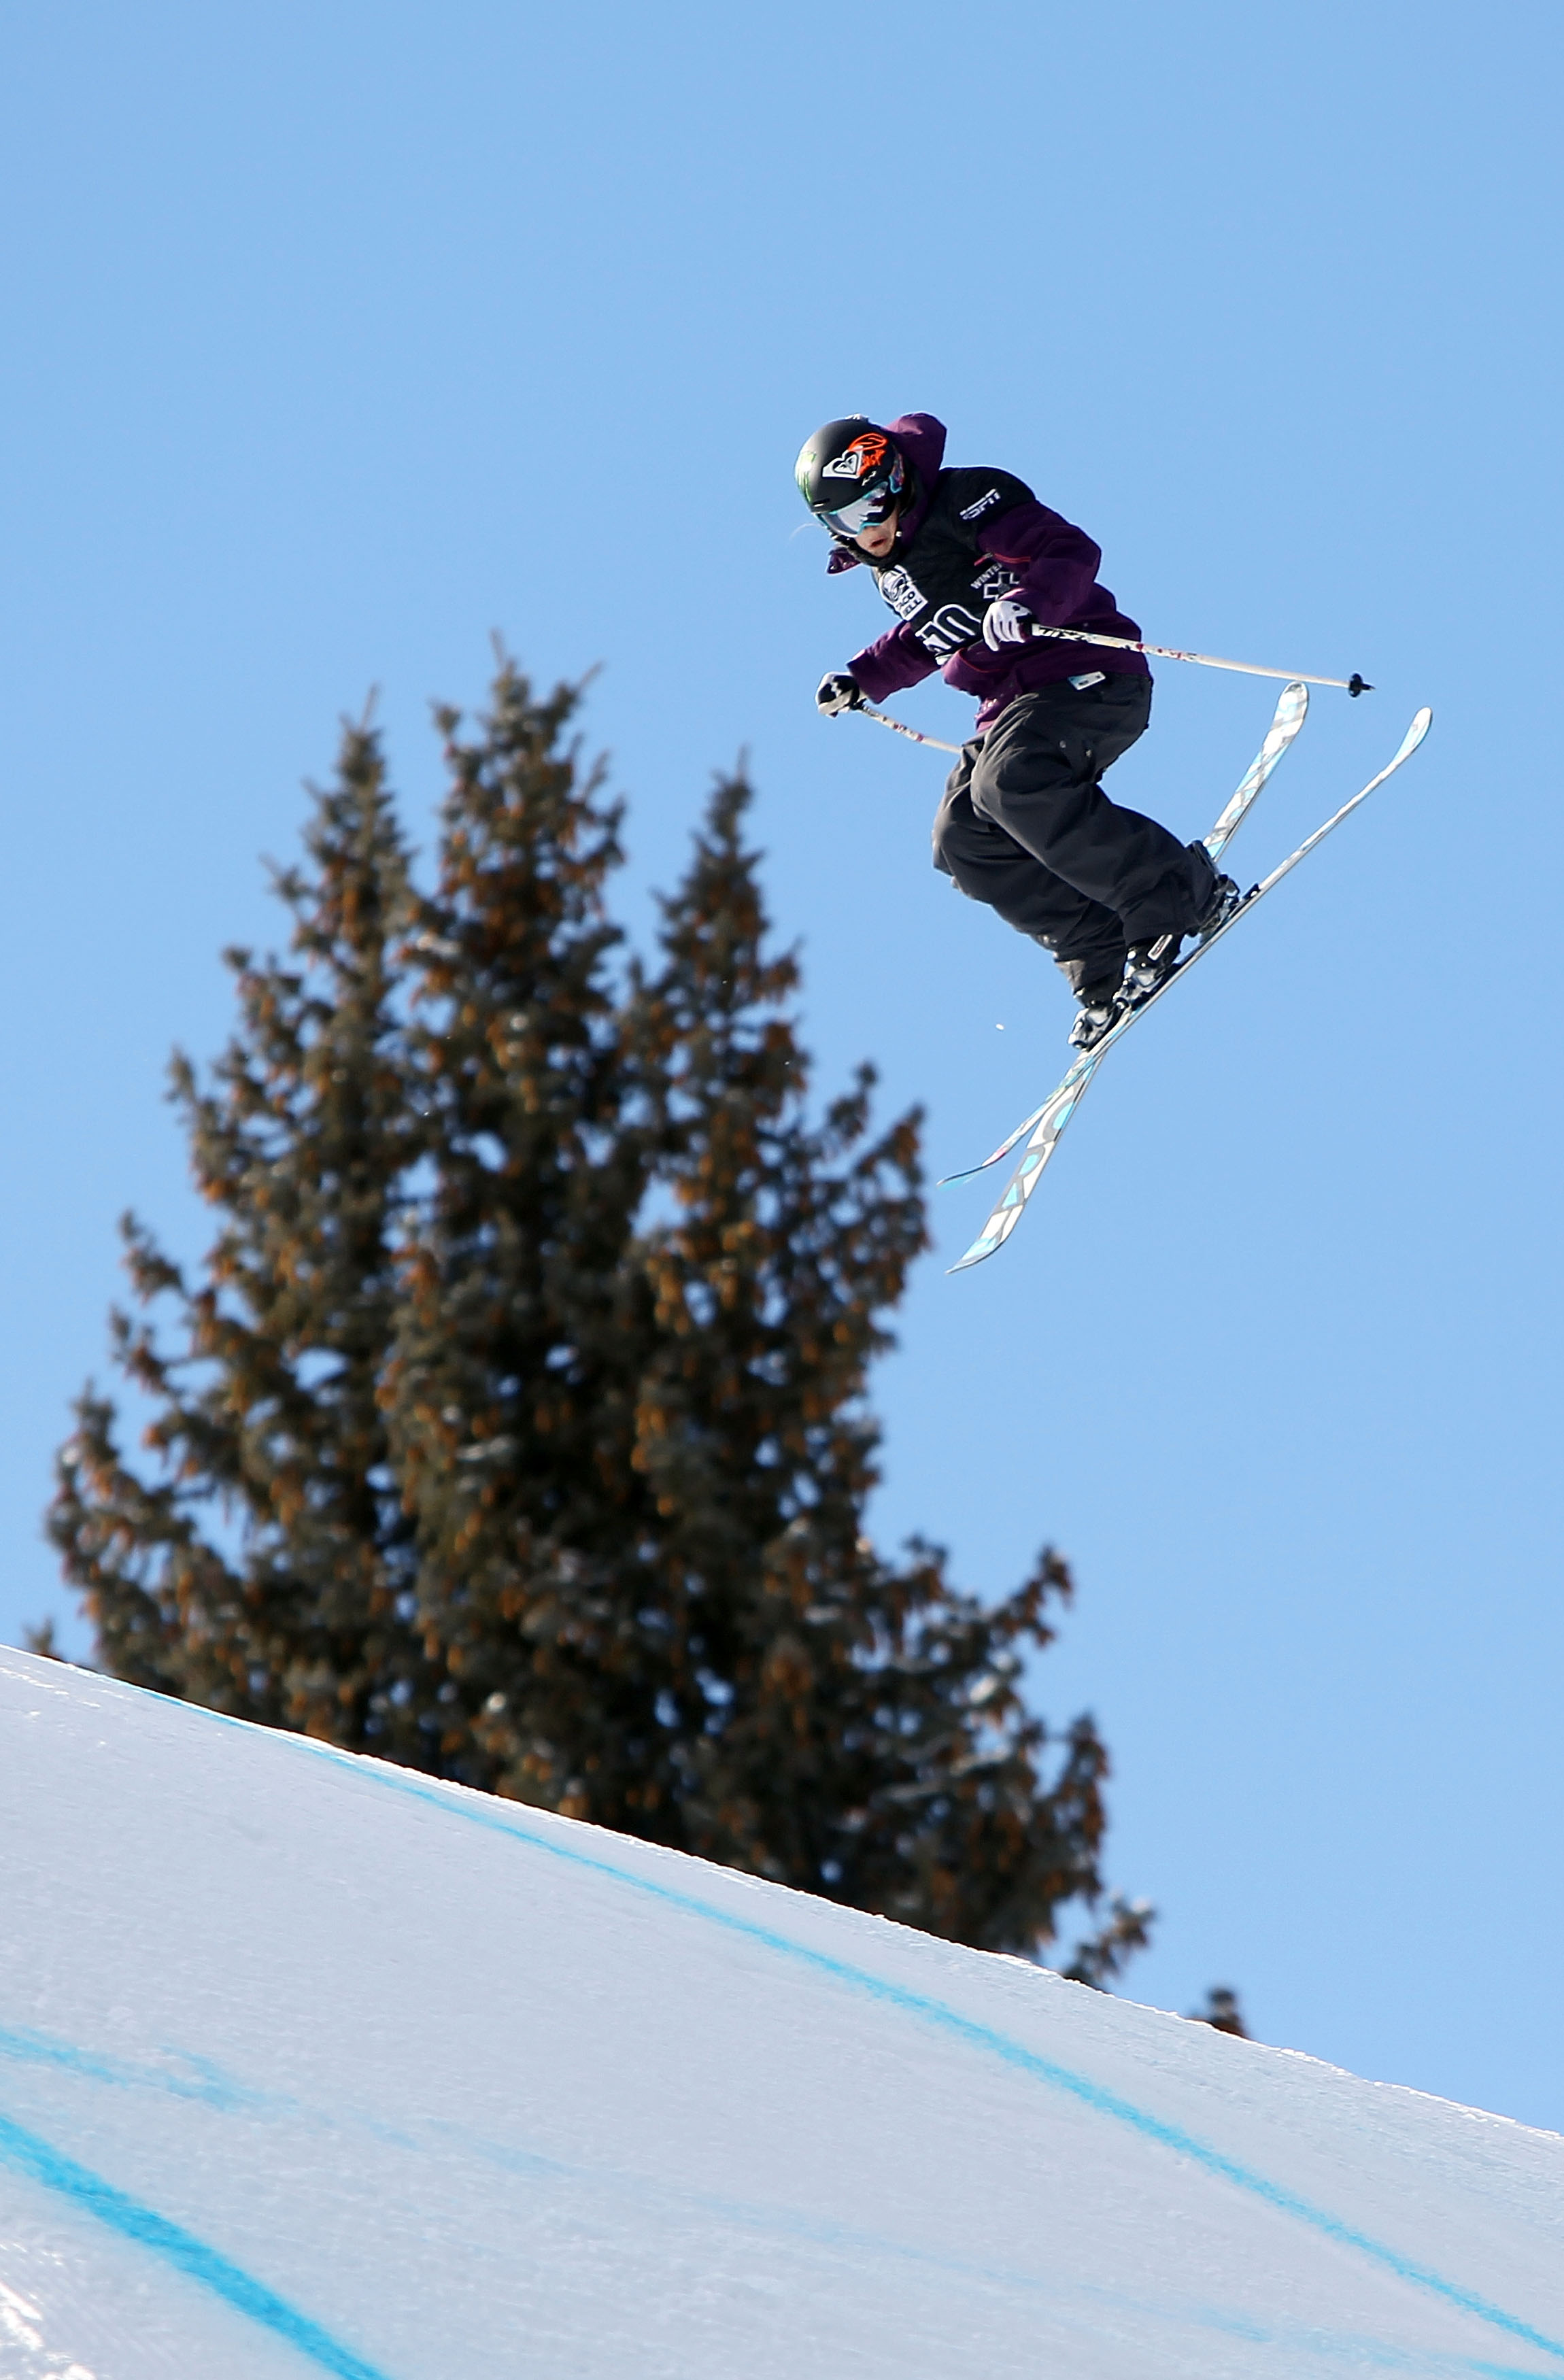 ASPEN, CO - JANUARY 28:  Sarah Burke of Canada does an aerial maneuver as she descends the course to finish sixth in the Women's Skiing Slopestyle Finals during Winter X Games 14 at Buttermilk Mountain on January 28, 2010 in Aspen, Colorado.  (Photo by Do